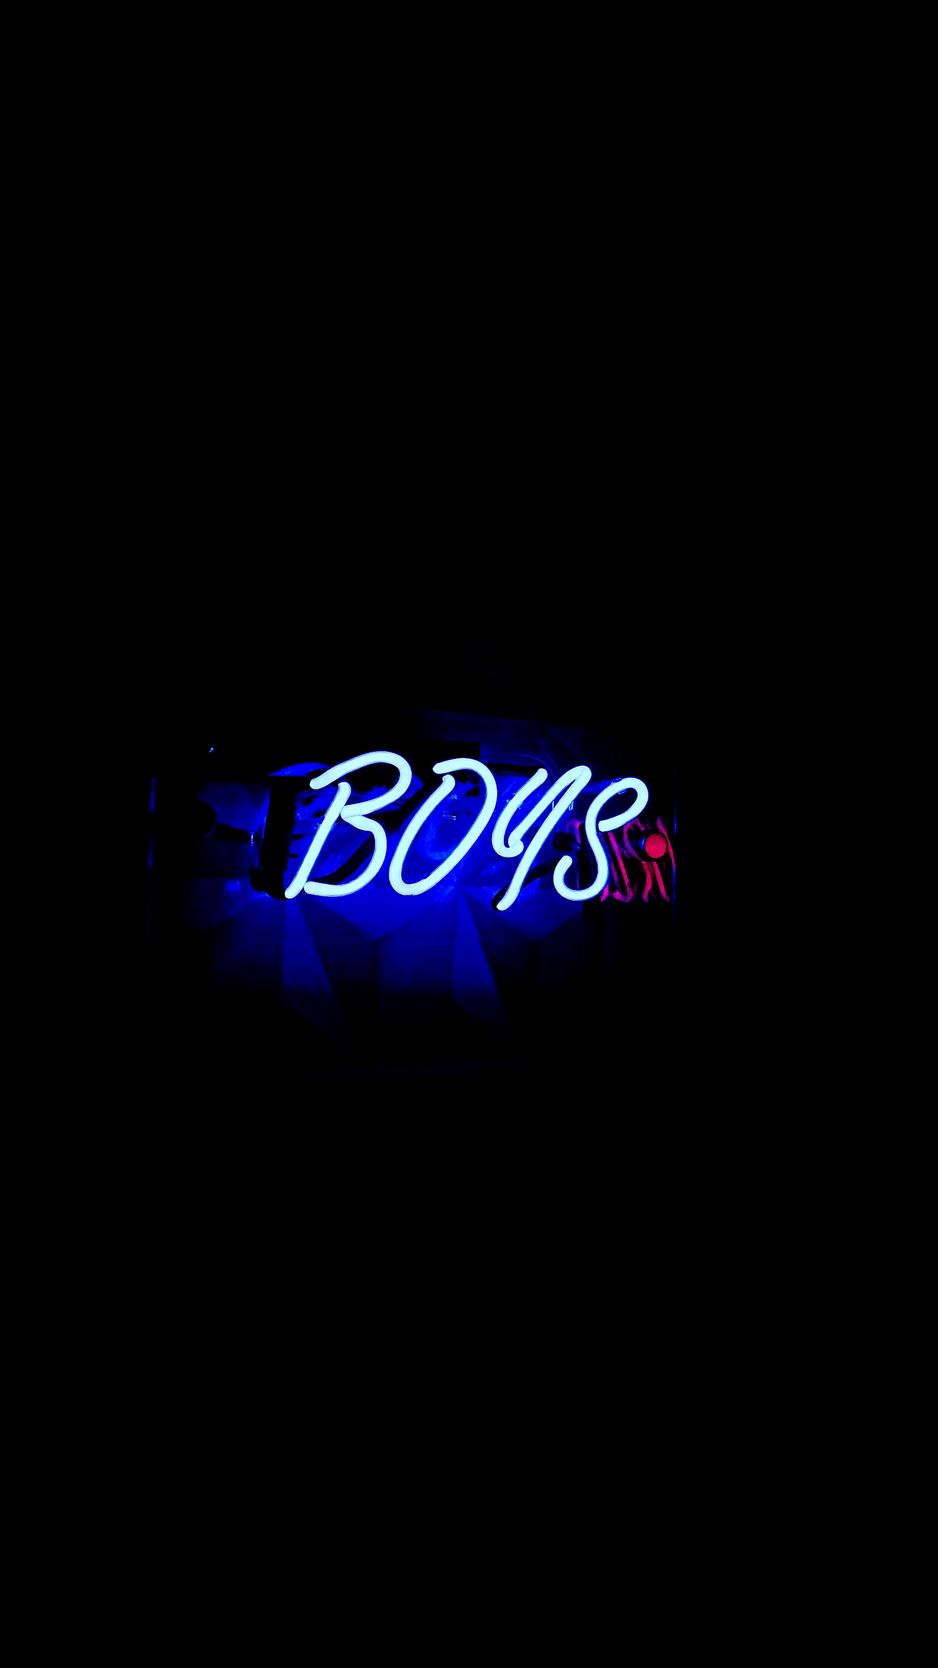 Download wallpaper 938x1668 boys, word, neon, signboard, light, blue iphone  8/7/6s/6 for parallax hd background